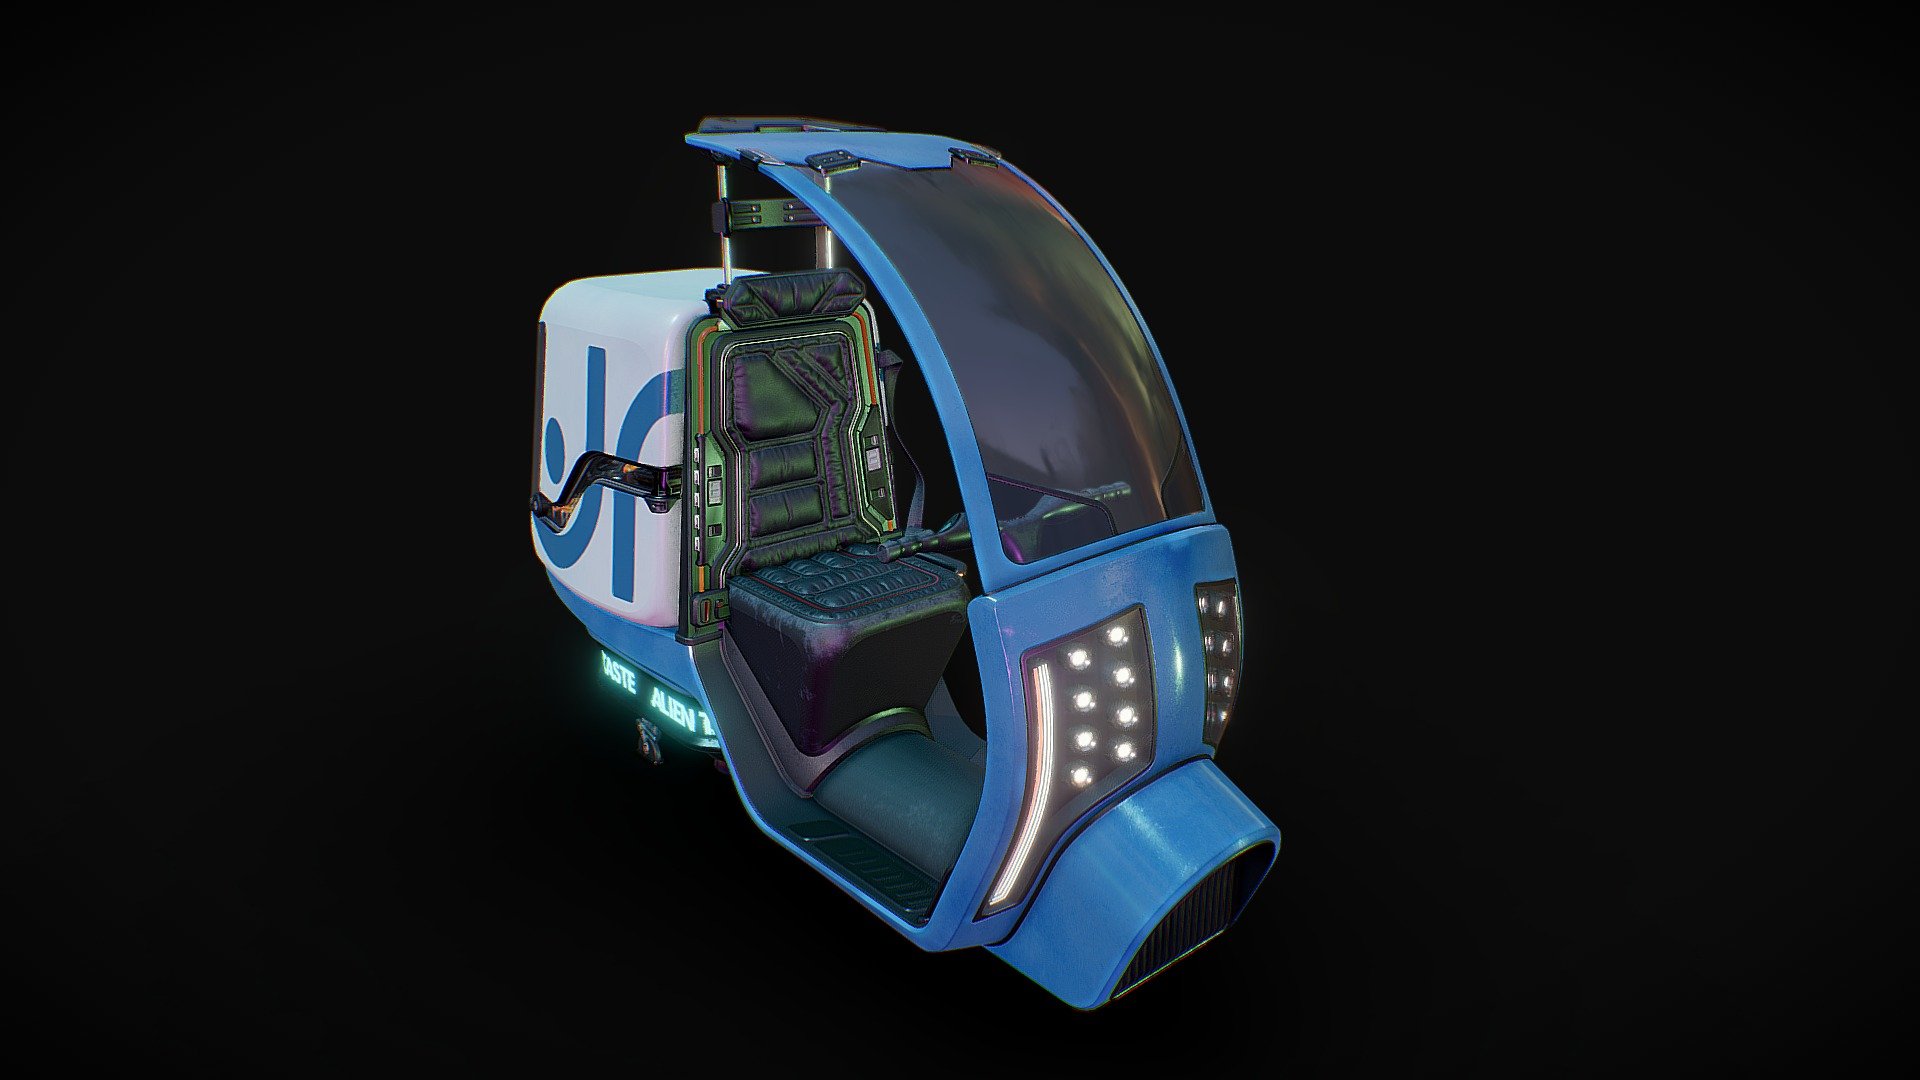 Delivery hover bike from a cyberpunk setting. If you like this model and have some time, pls support me on Artstation (it's free) by pressing like. Thank you.
https://www.artstation.com/artwork/g0y5LP

Feel free to use this asset in your projects. 
Parameters: 98k tris / 6 texture sets / 7 mats (6,7 material - texture 6)
Disclaimer: For a games textures can be more optimized. You can optimize/unite textures and materials for your purposes.

Have a good day 3d model